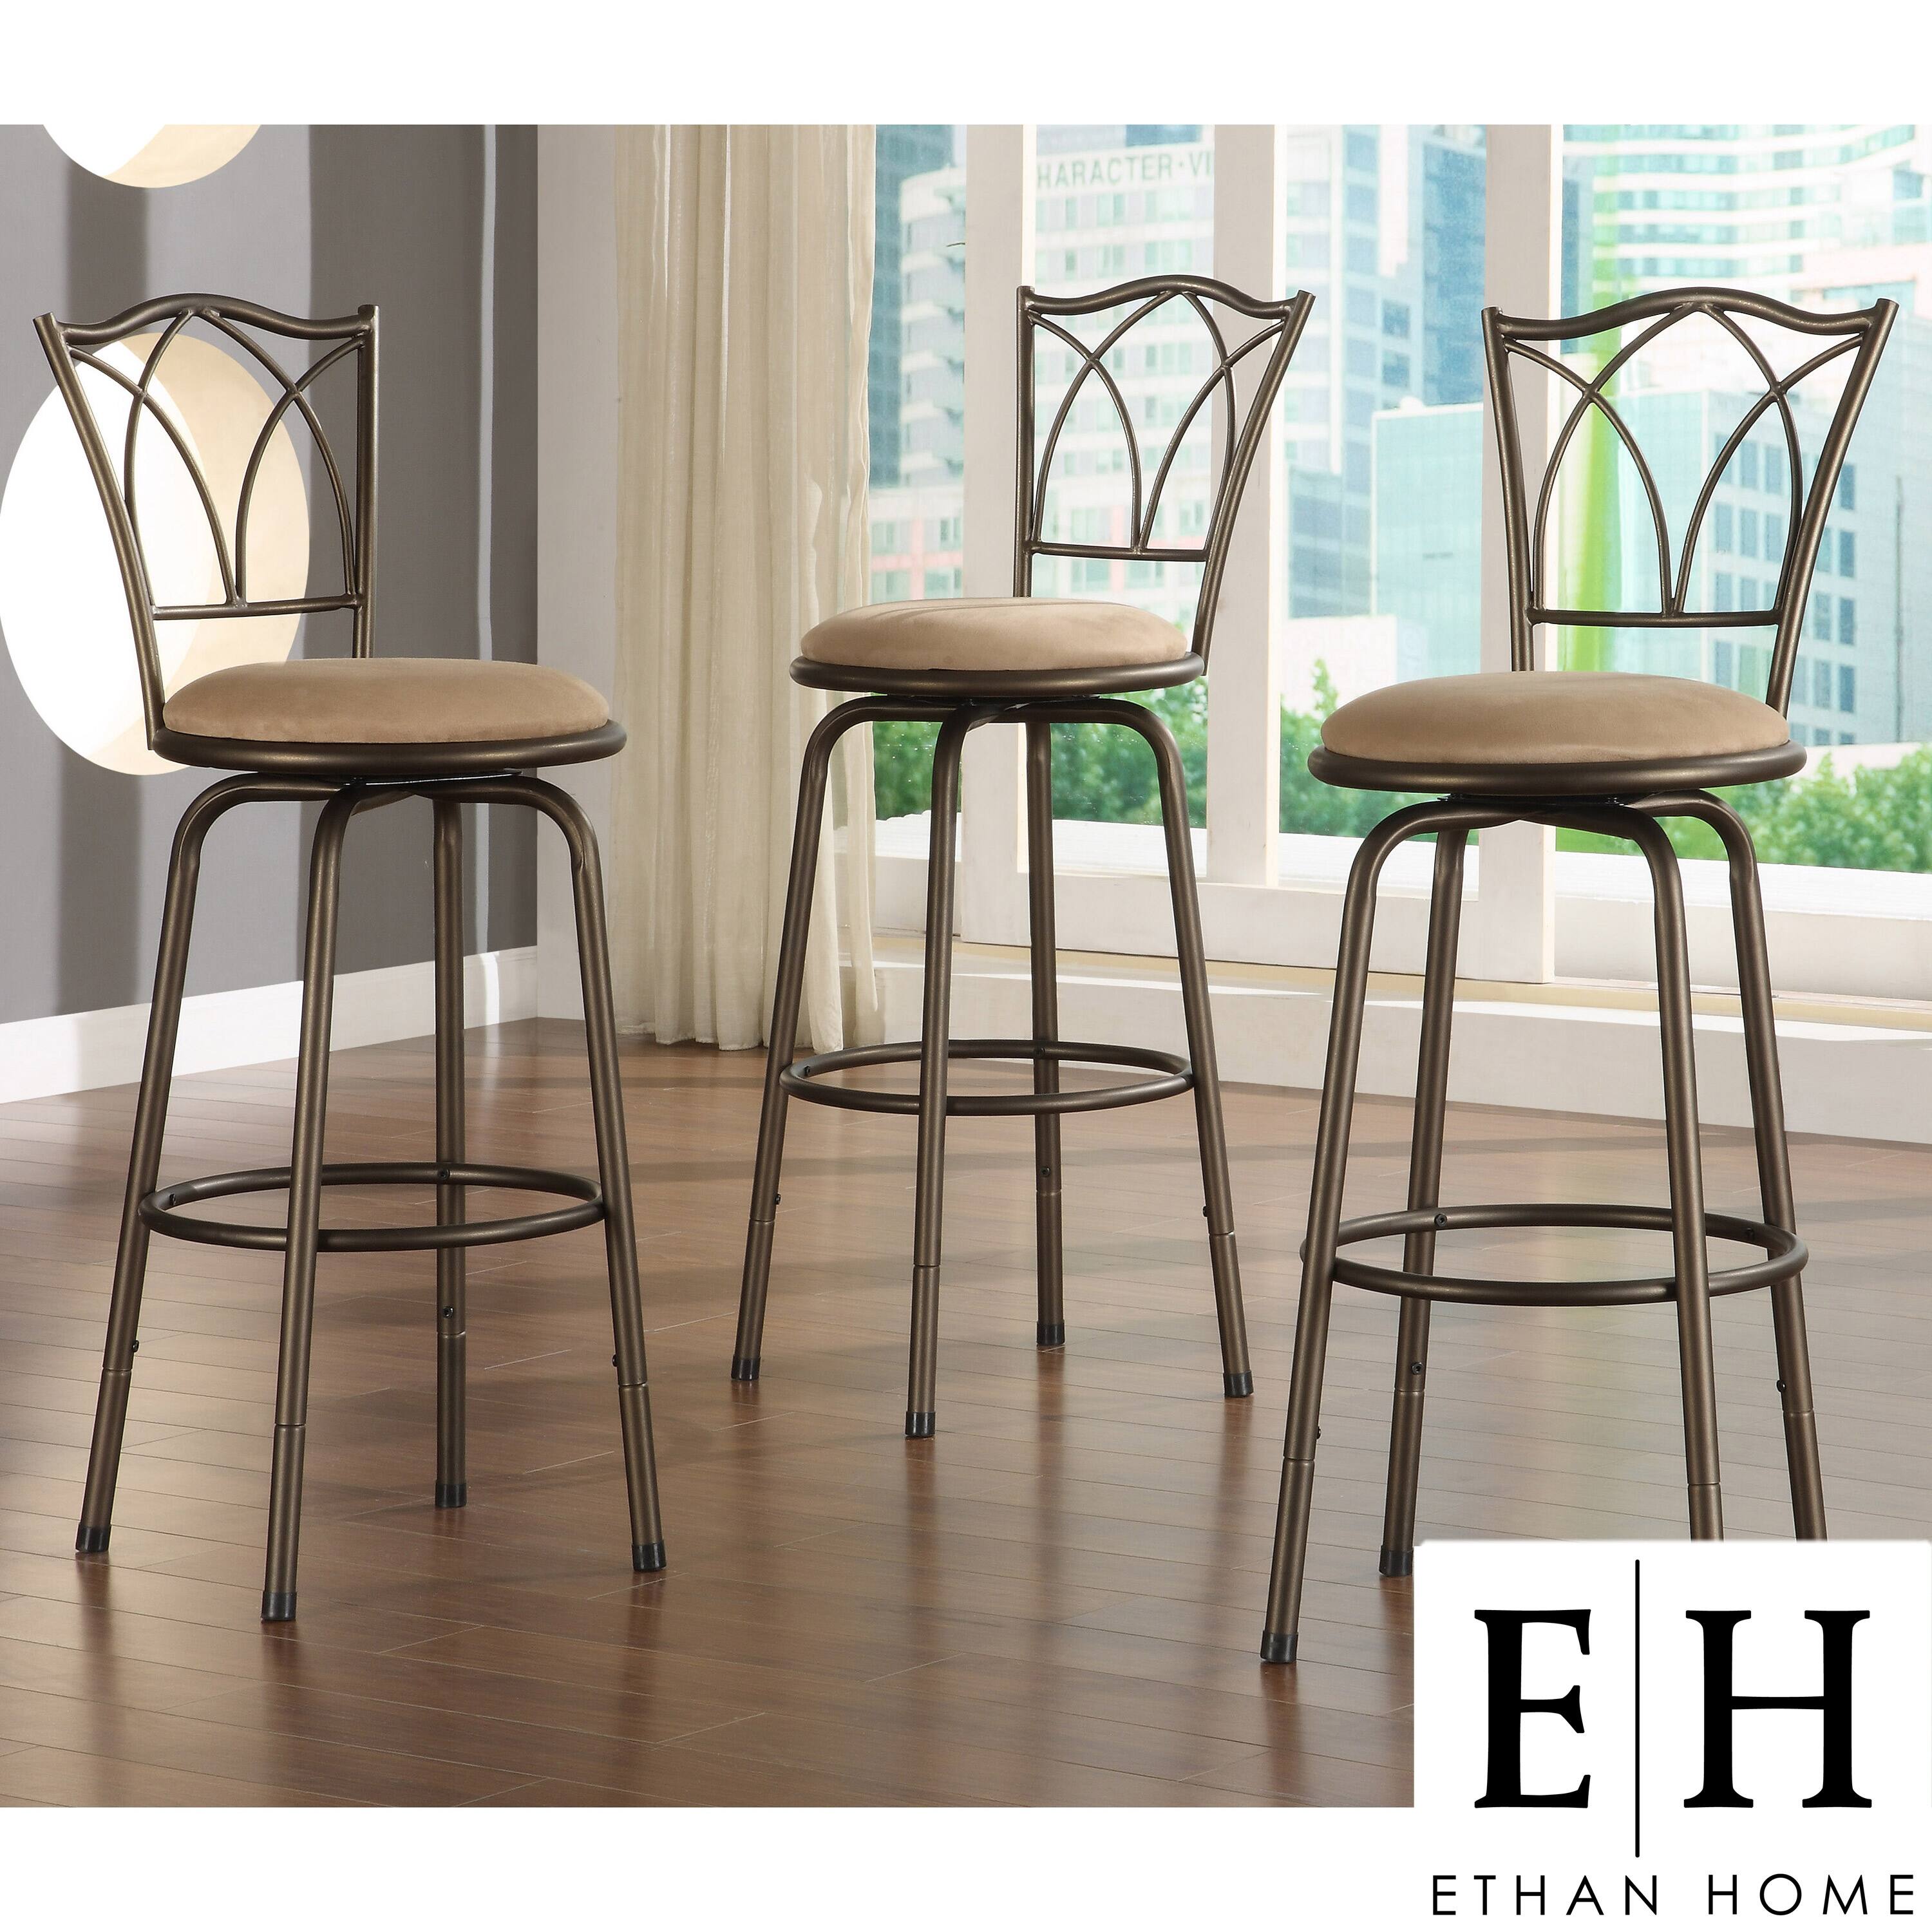 cross swivel counter barstool set of 3 compare $ 135 99 today $ 122